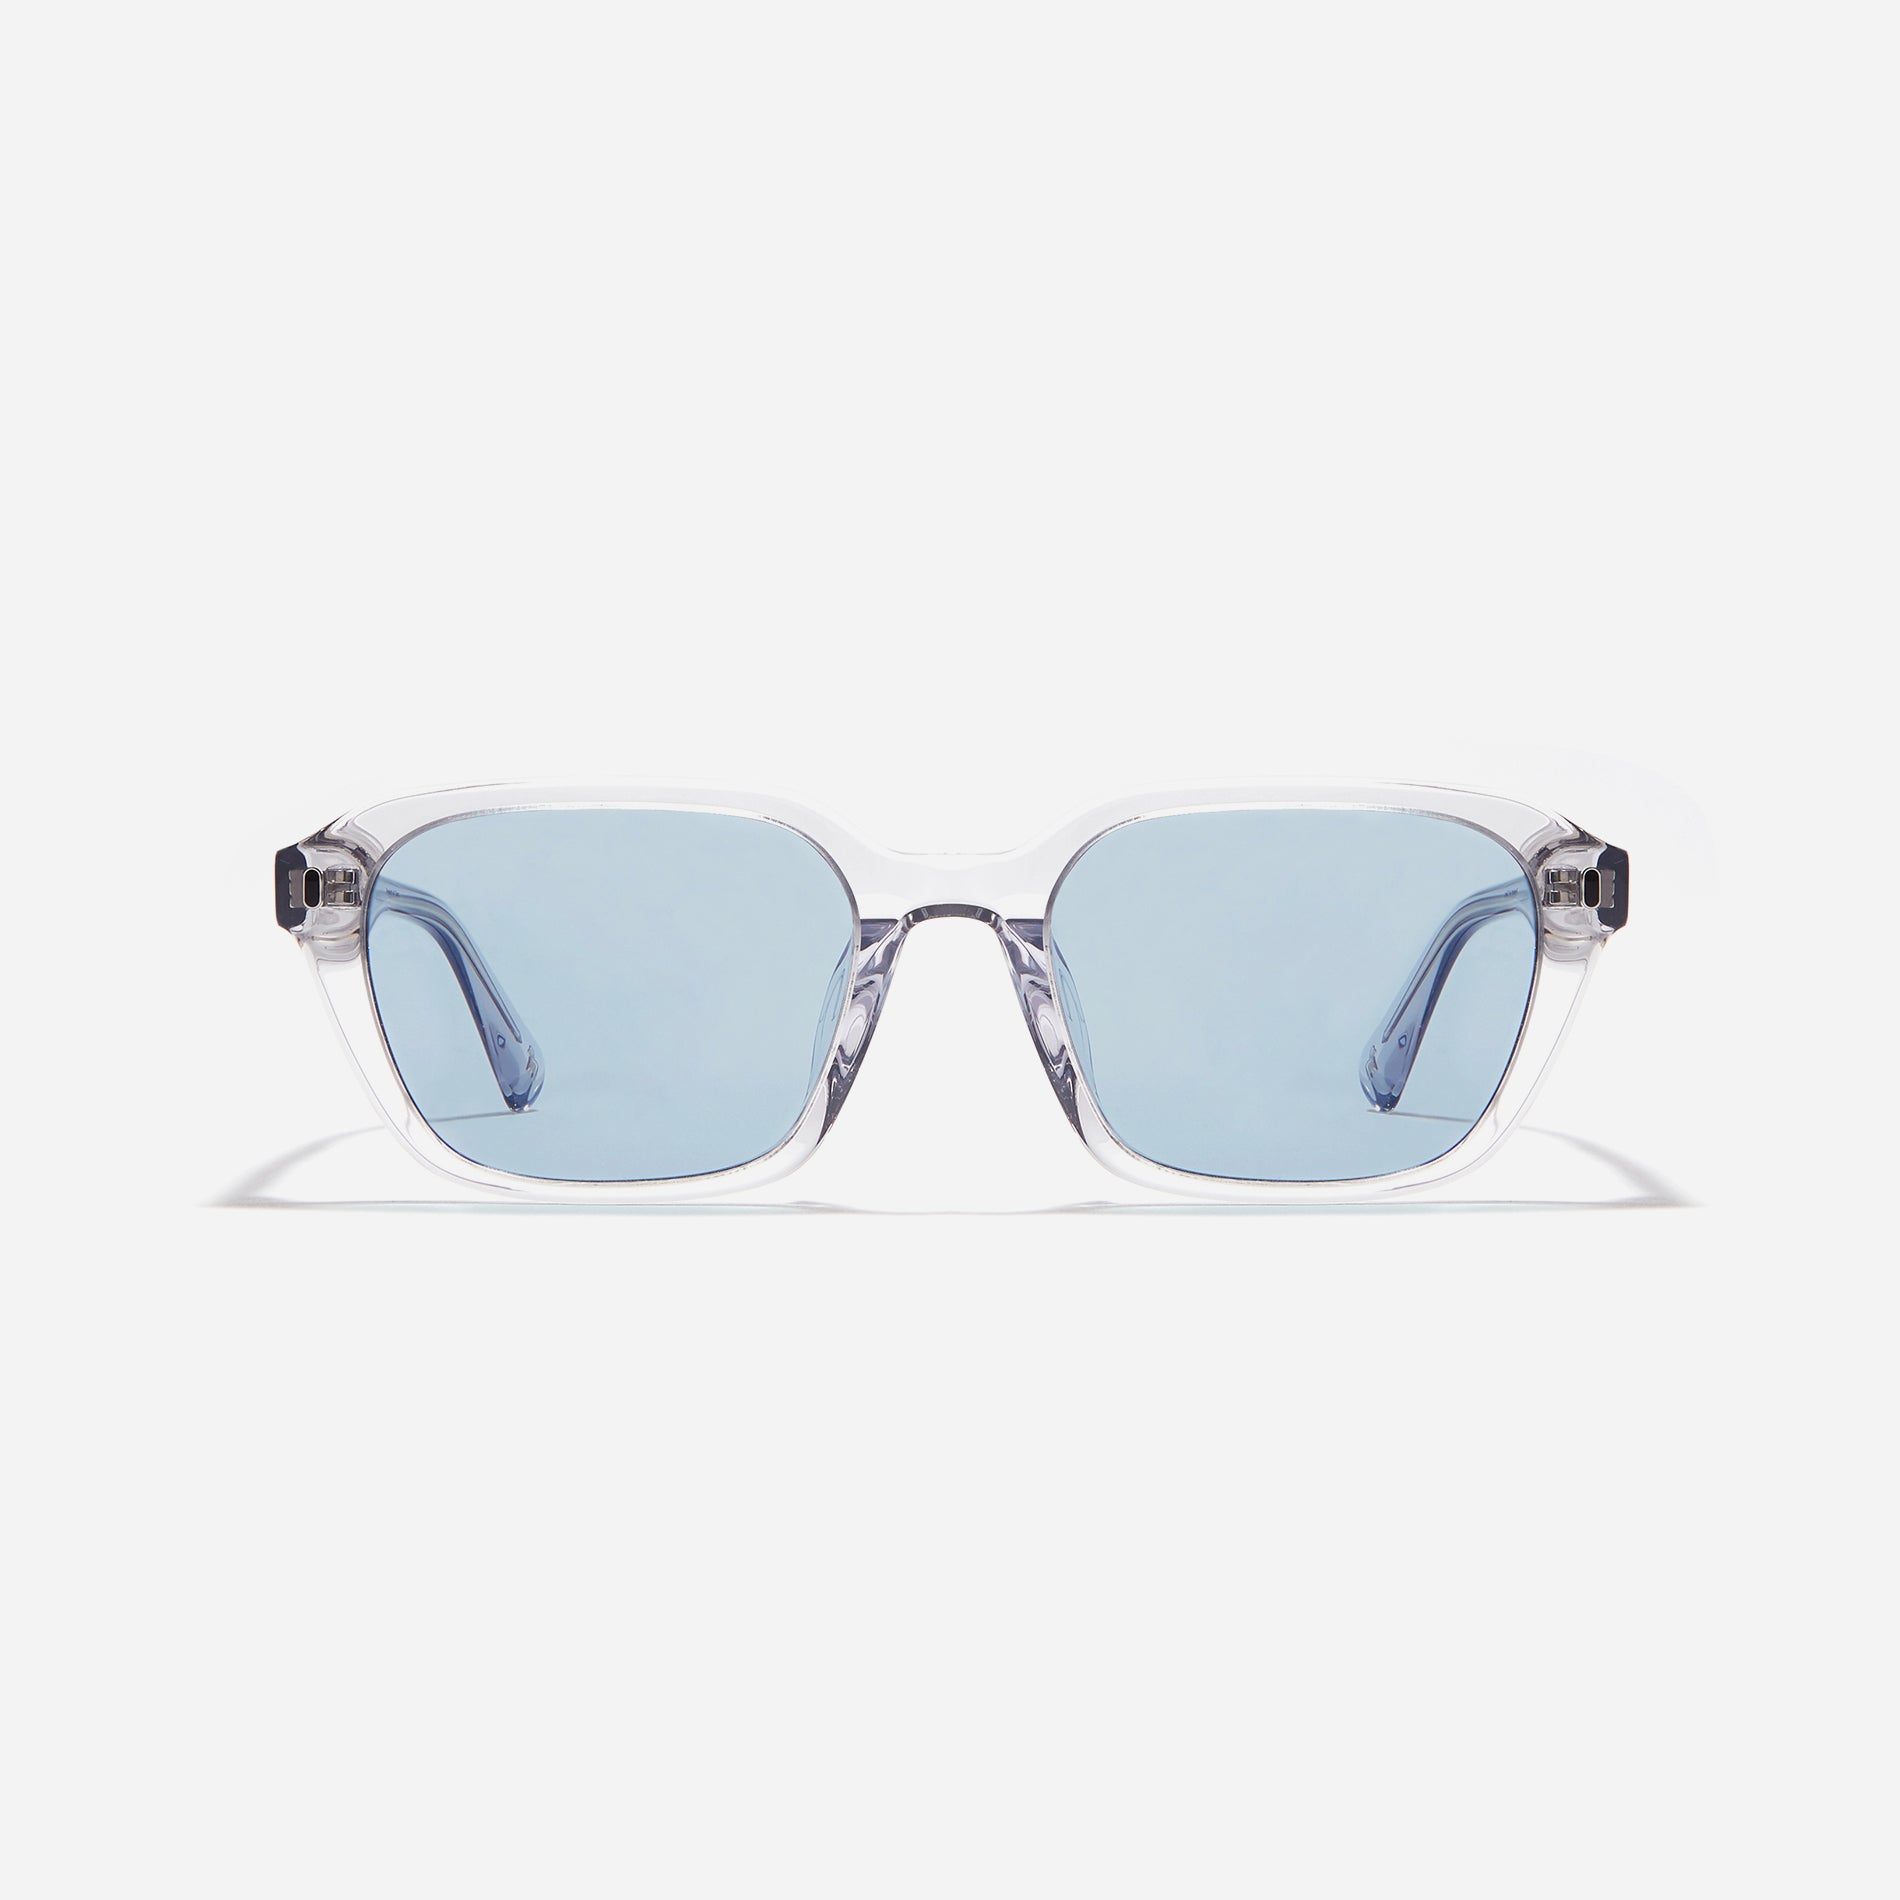 Square-shaped petite frame sunglasses accentuated with retro color details and a sleek narrow rim style. 